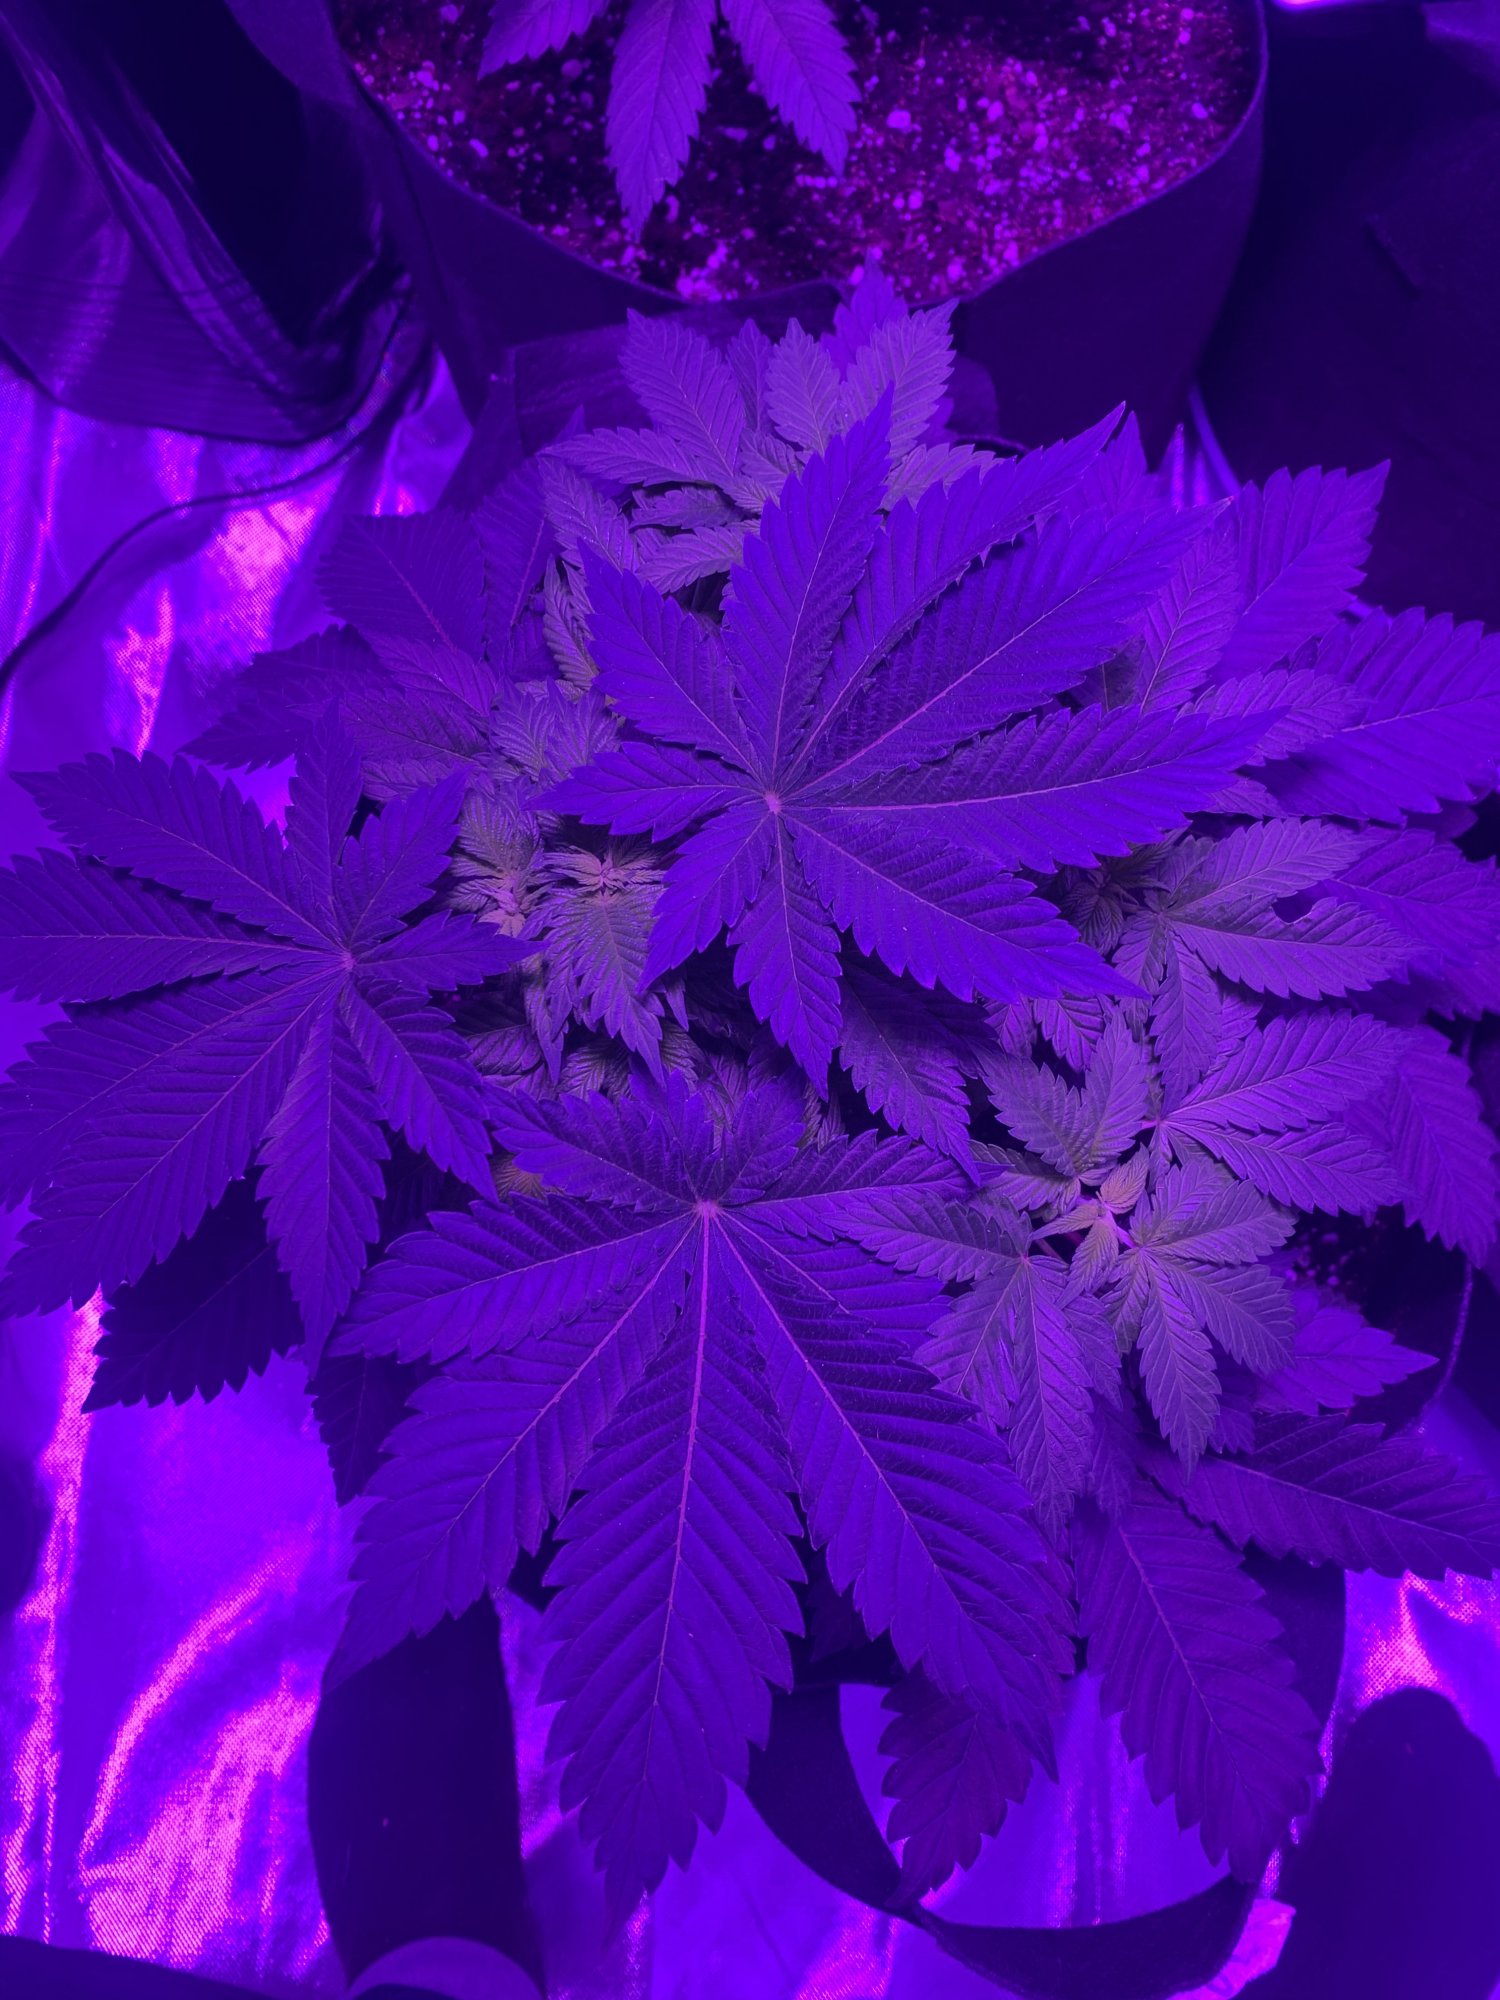 Hello first time grower and having some serious problems